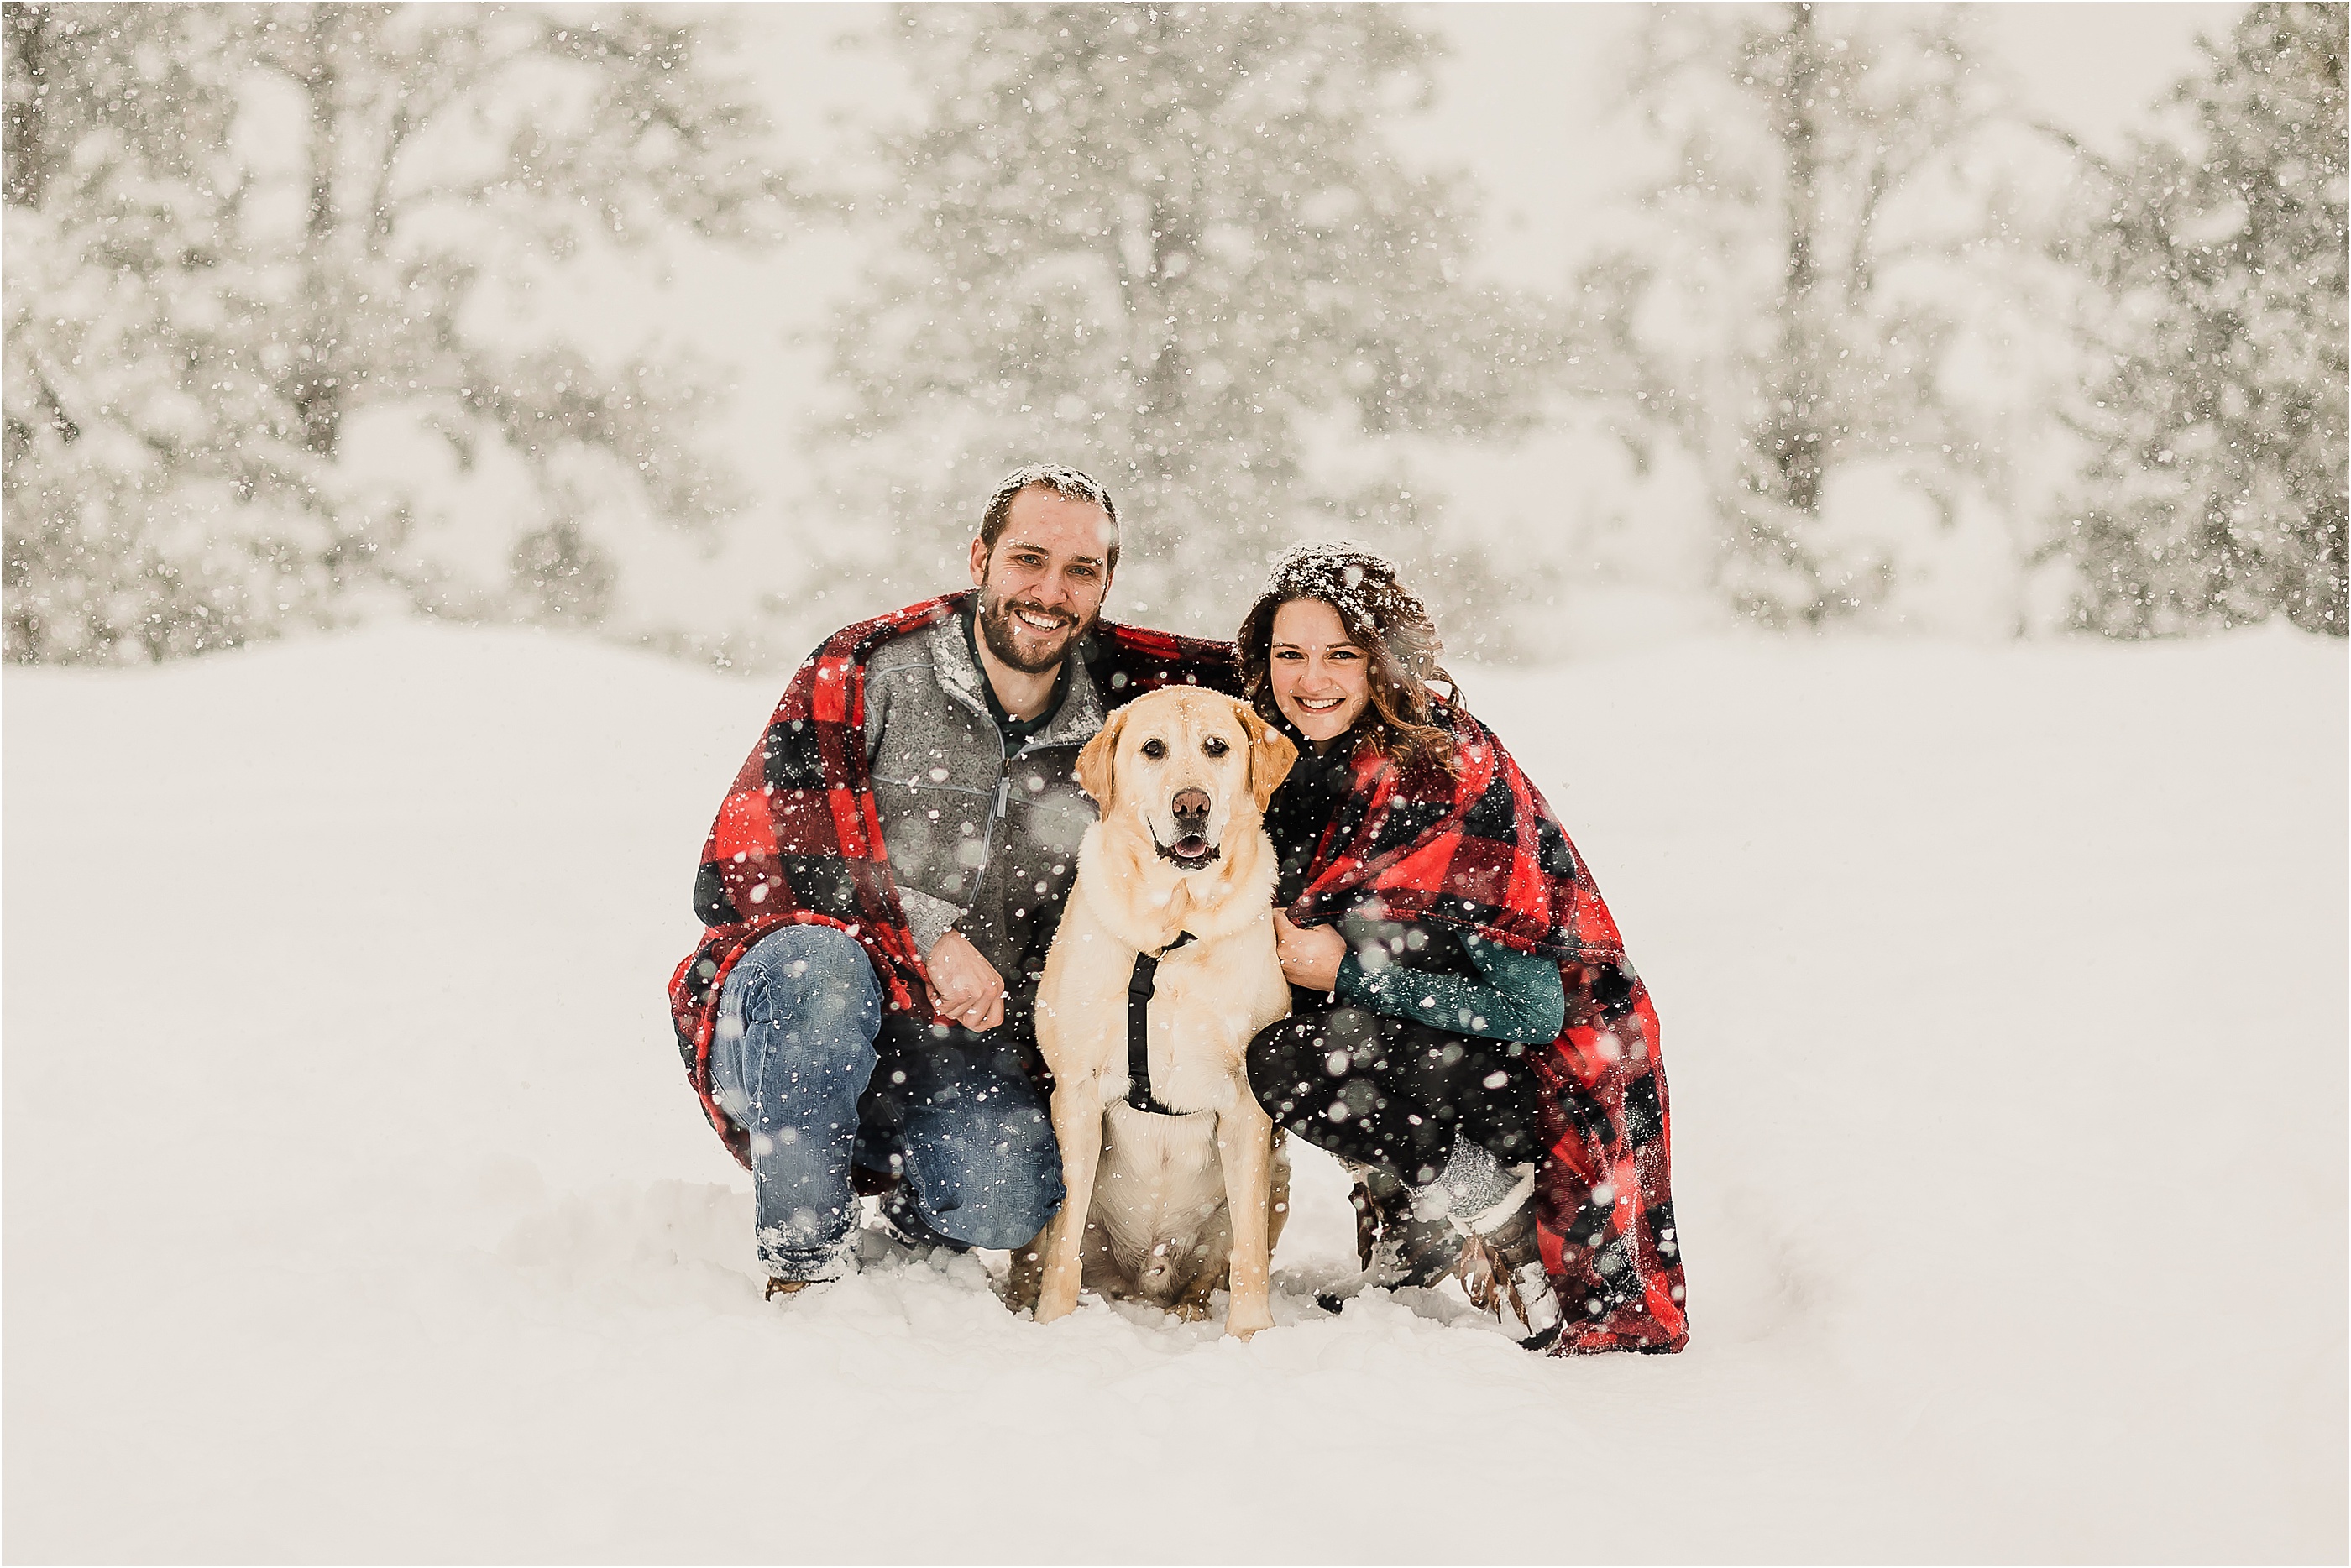 Engagement Photos Colorado with dog in the snow